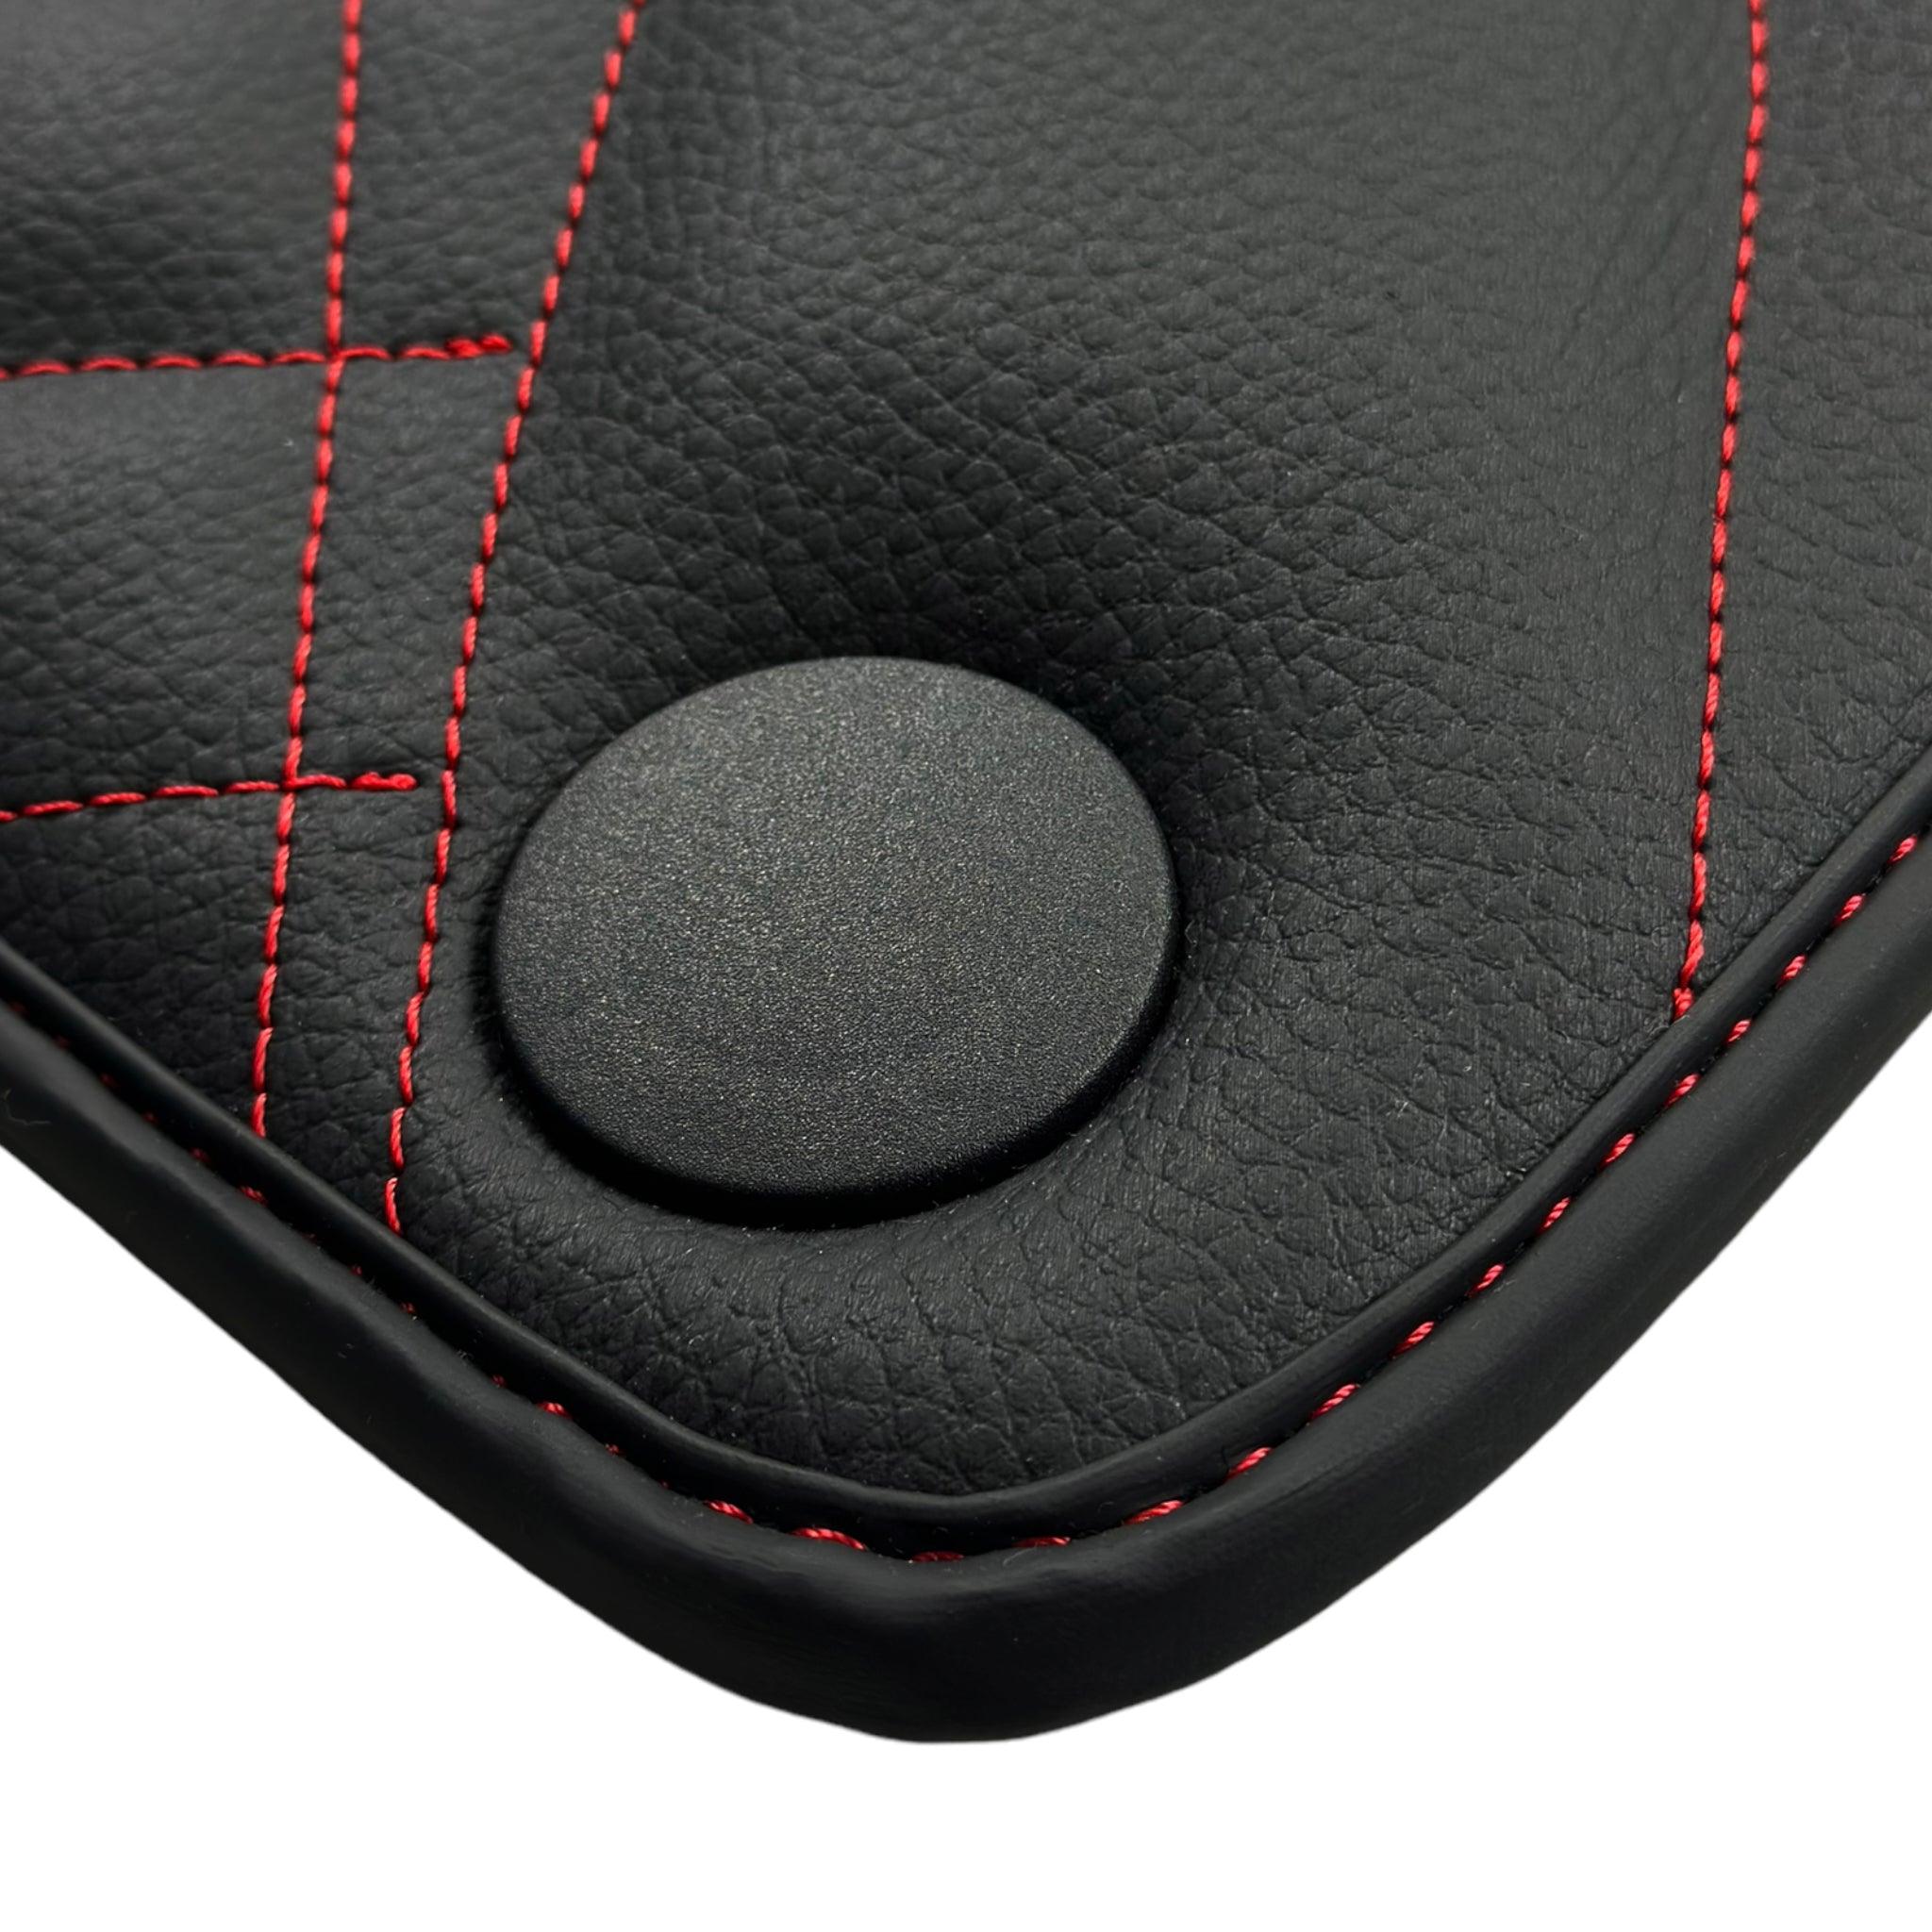 Black Leather Floor Mats For Mercedes Benz GLA-Class H247 (2020-2023)